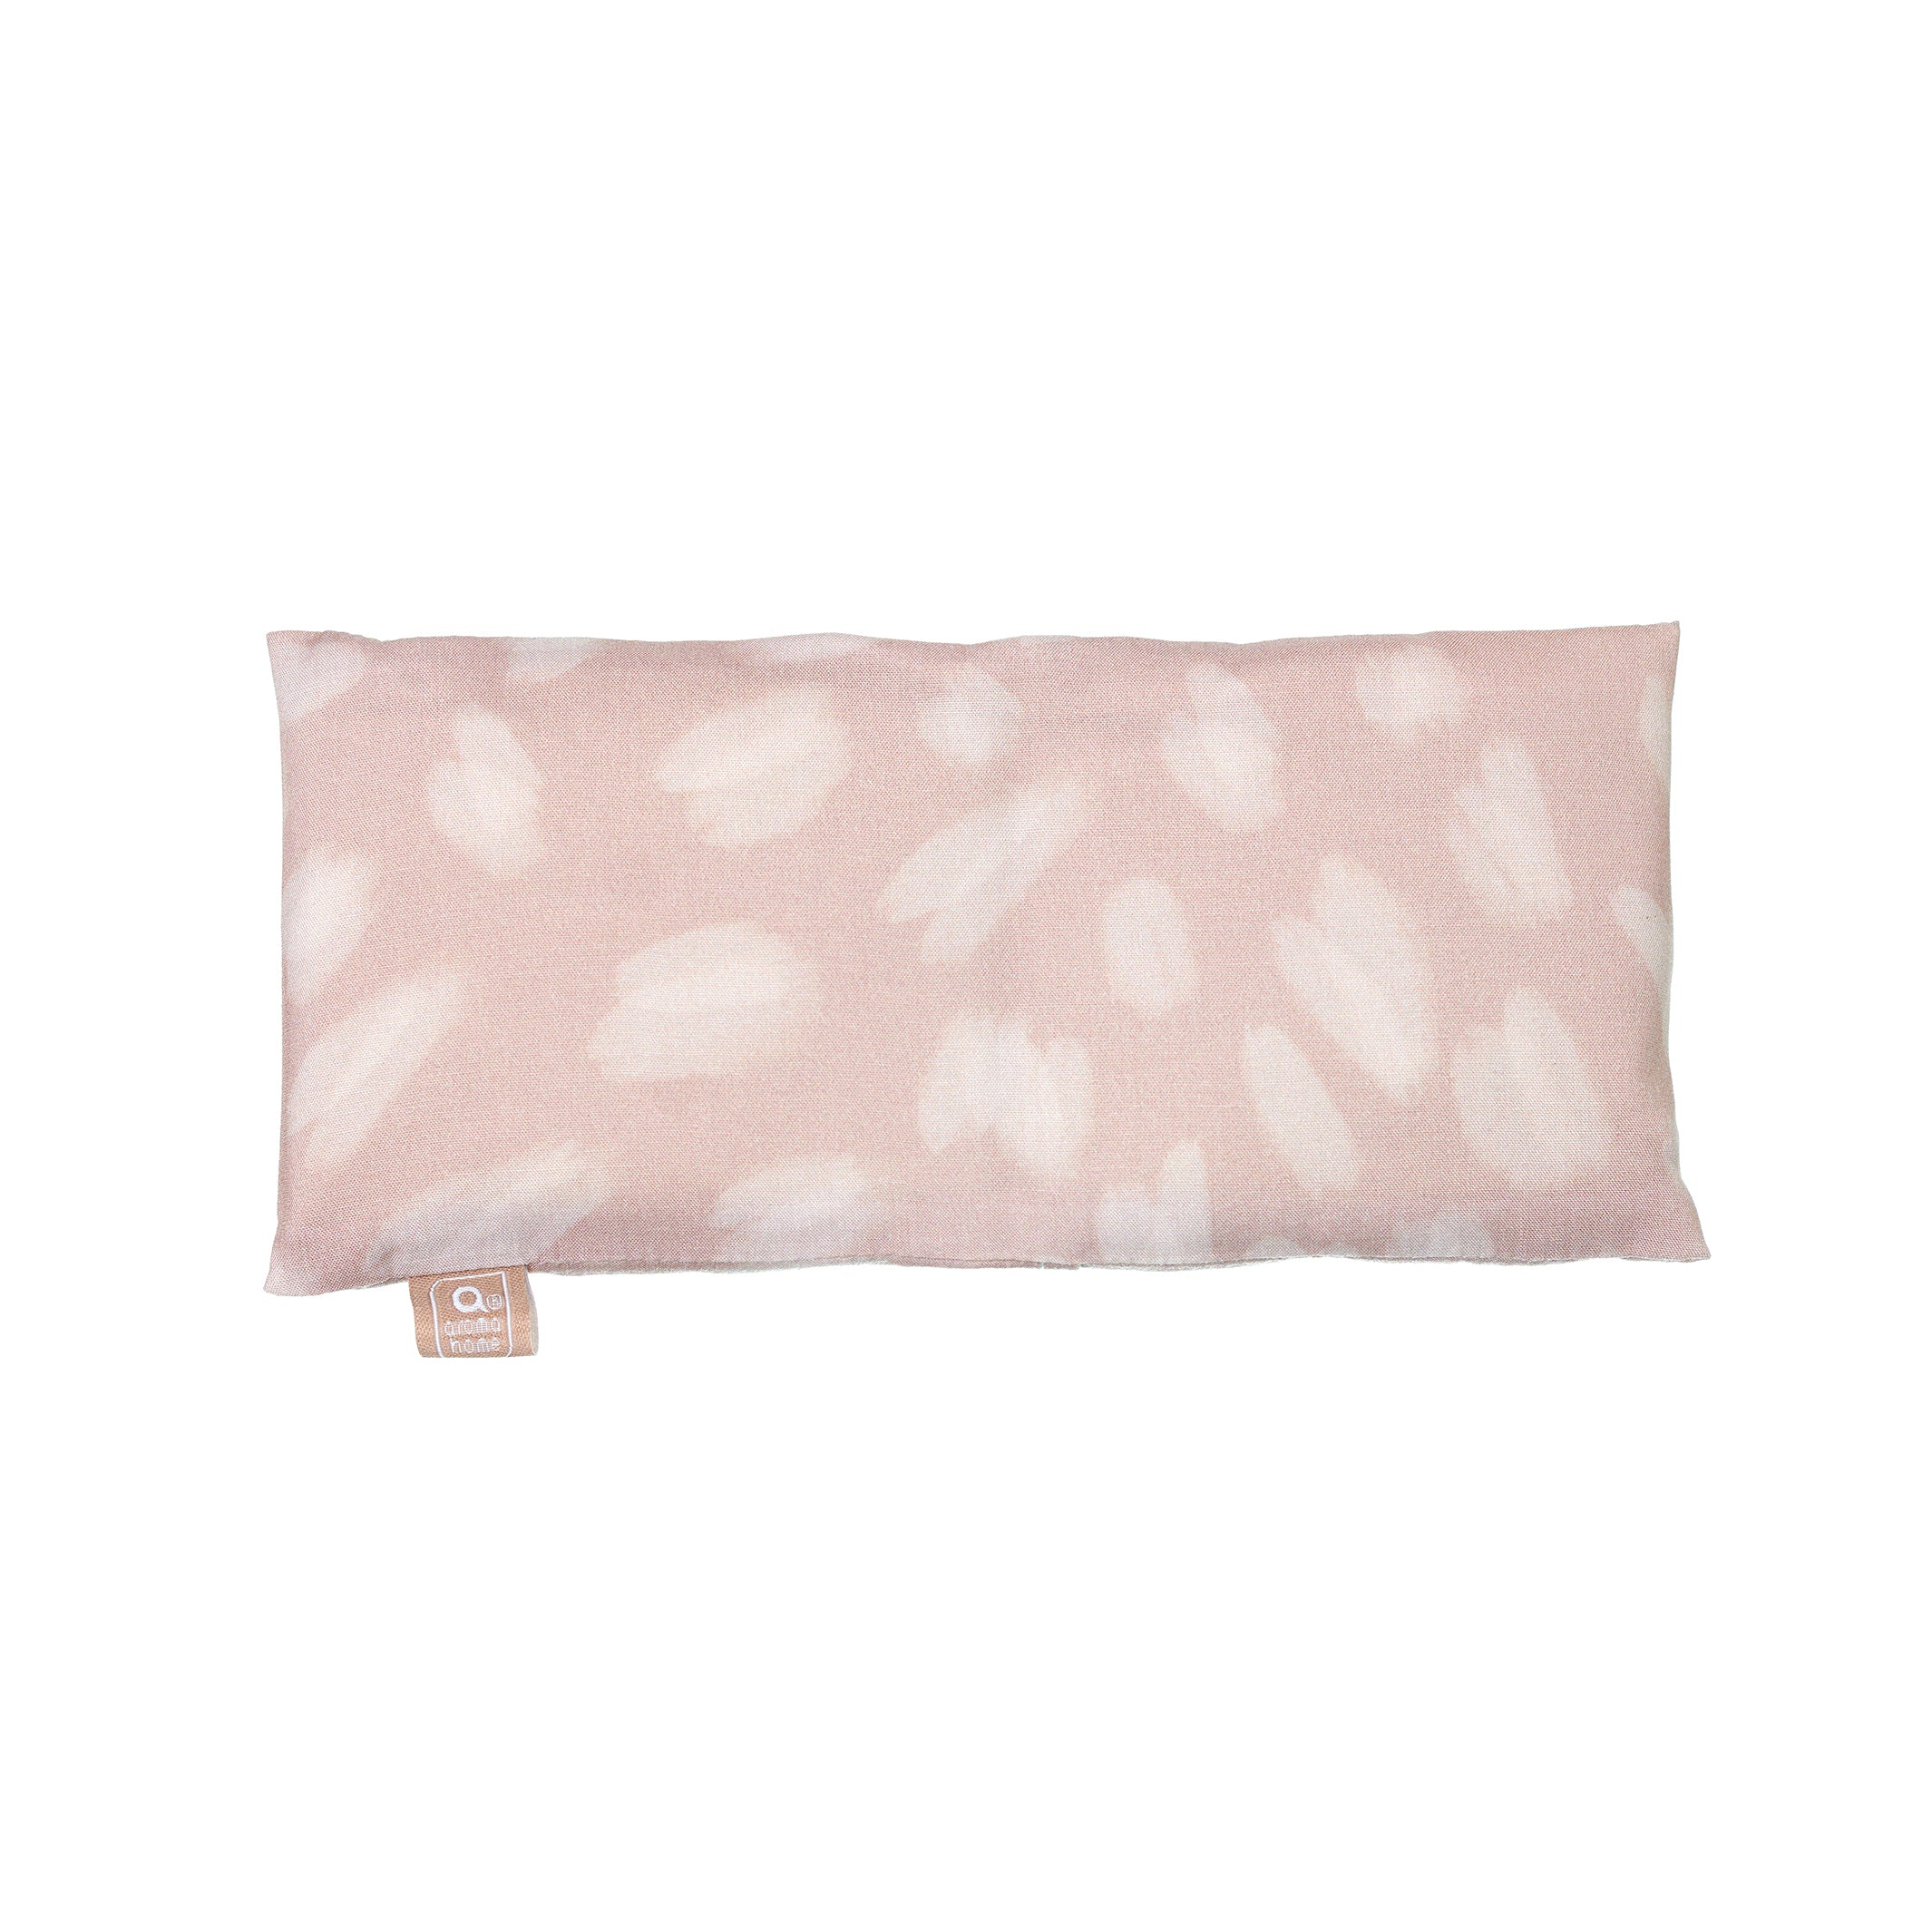 Luxury Heatable Calming Eye Pillow Fragranced with 100% Essential Ylang Ylang Oil